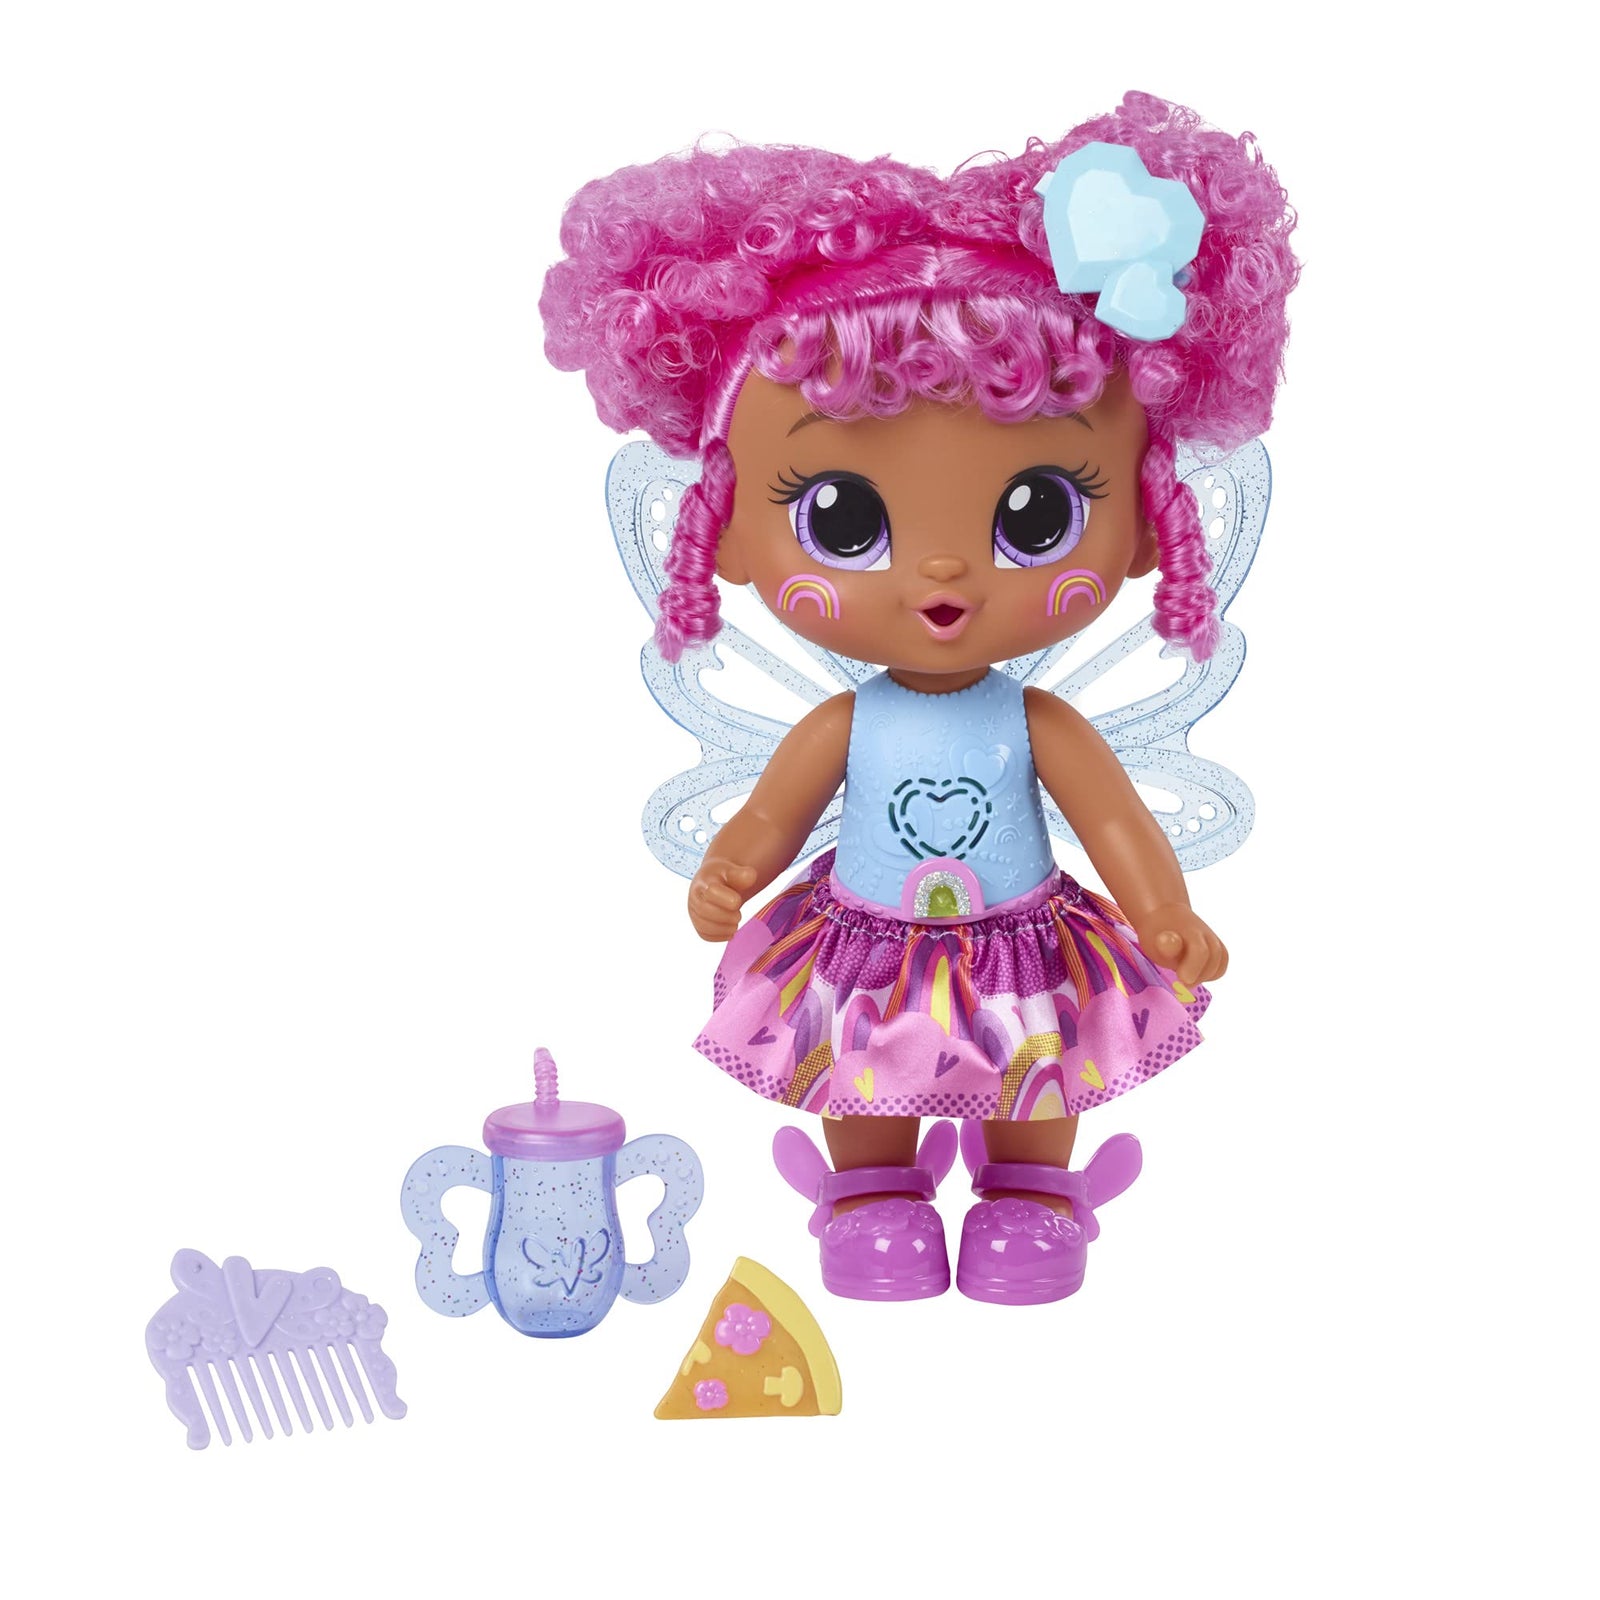 Baby Alive GloPixies Doll, Gabi Glitter, Glowing Pixie Doll Toy for Kids Ages 3 and Up, Interactive 10.5-inch Doll Glows with Pretend Feeding (Amazon Exclusive)